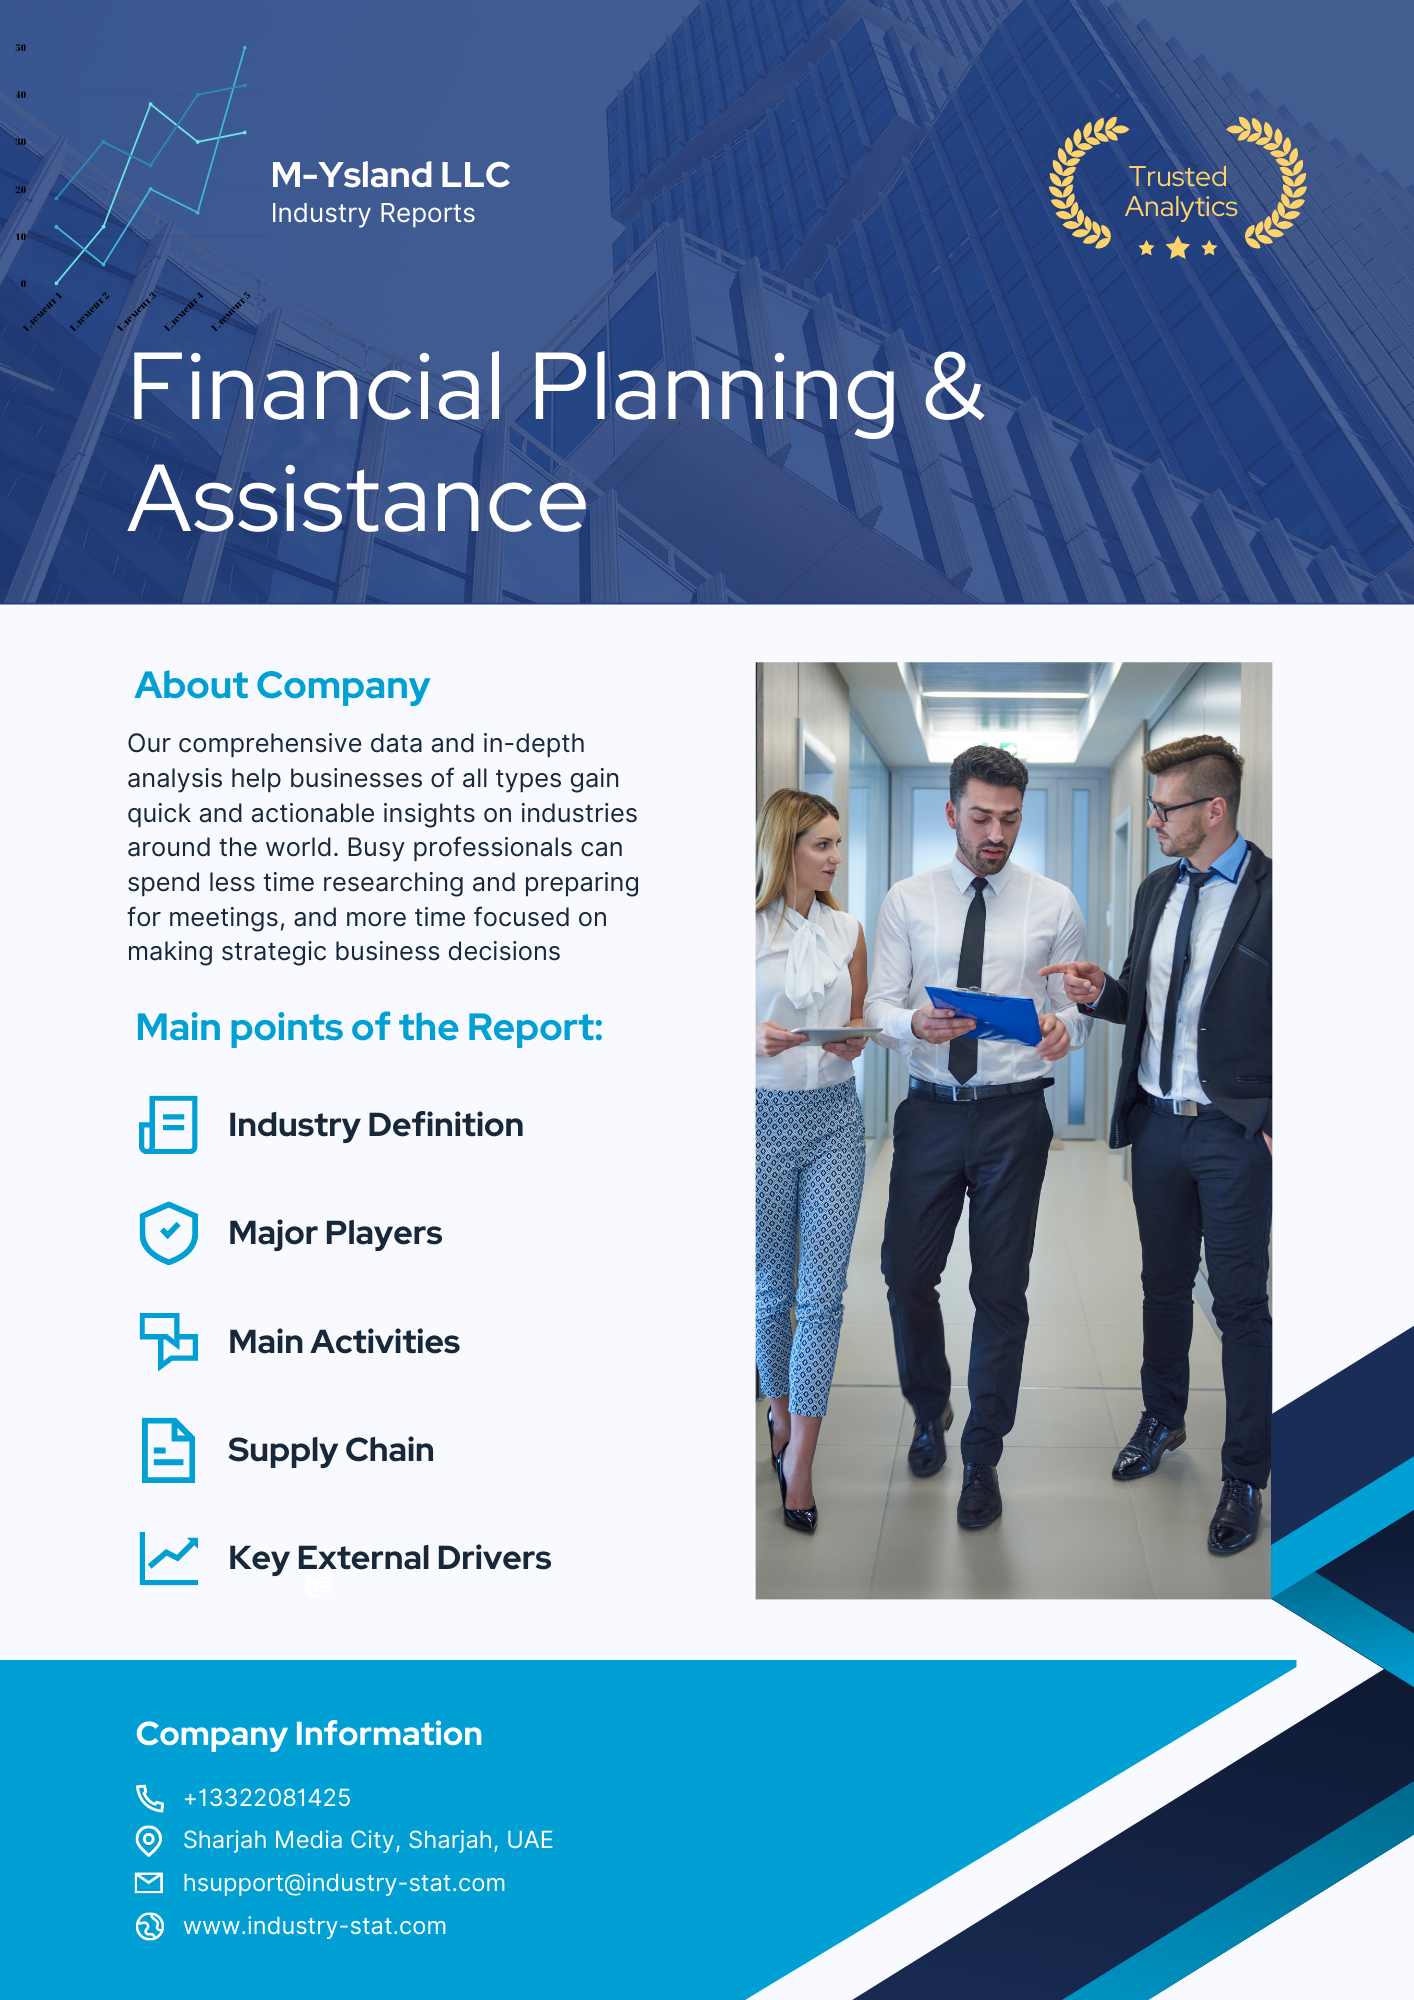 Financial Planning & Assistance